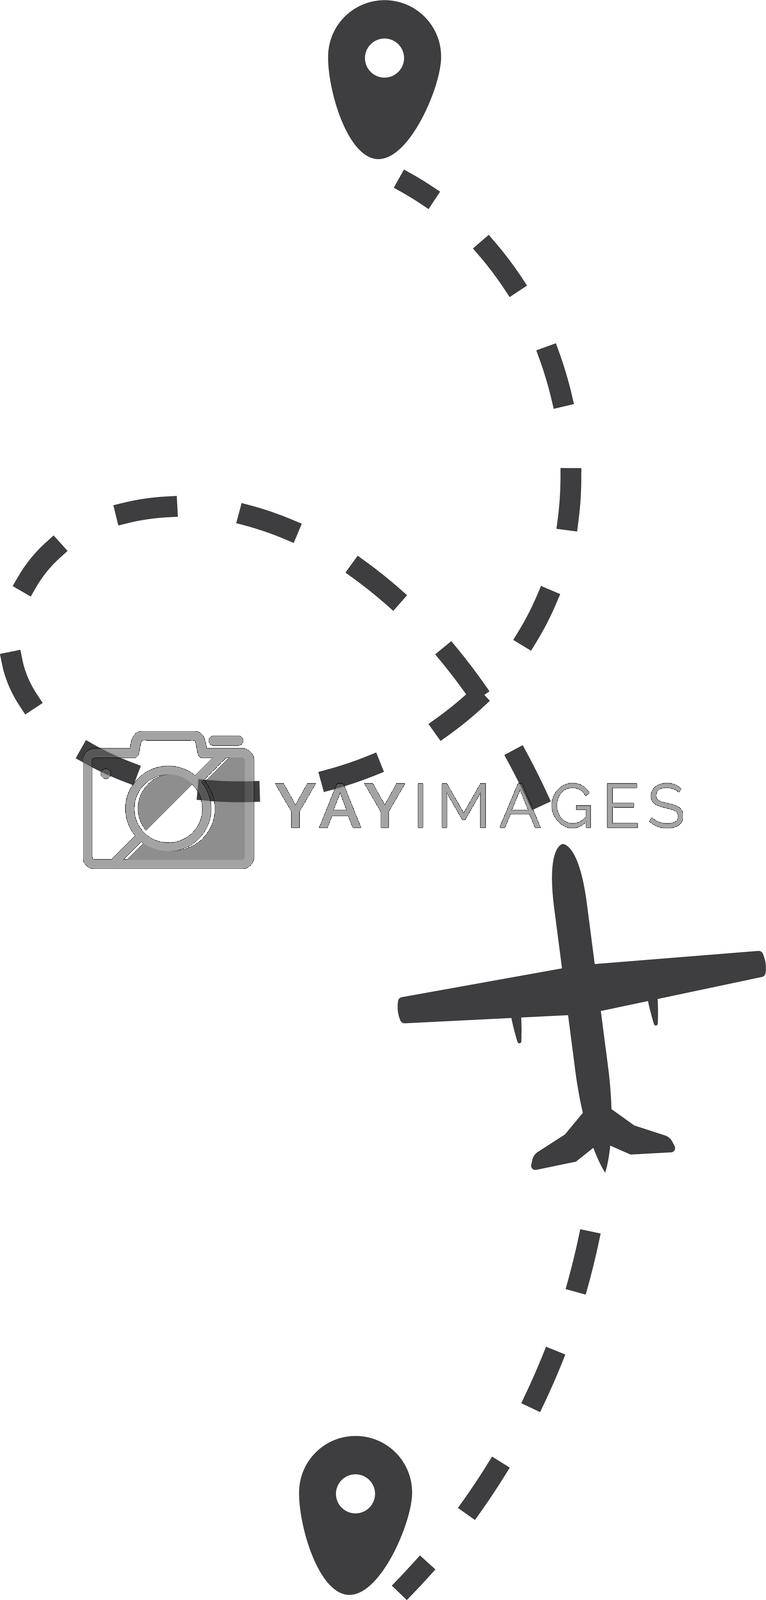 Royalty free image of Airplane route. Plane flight trail dashed lines by LadadikArt